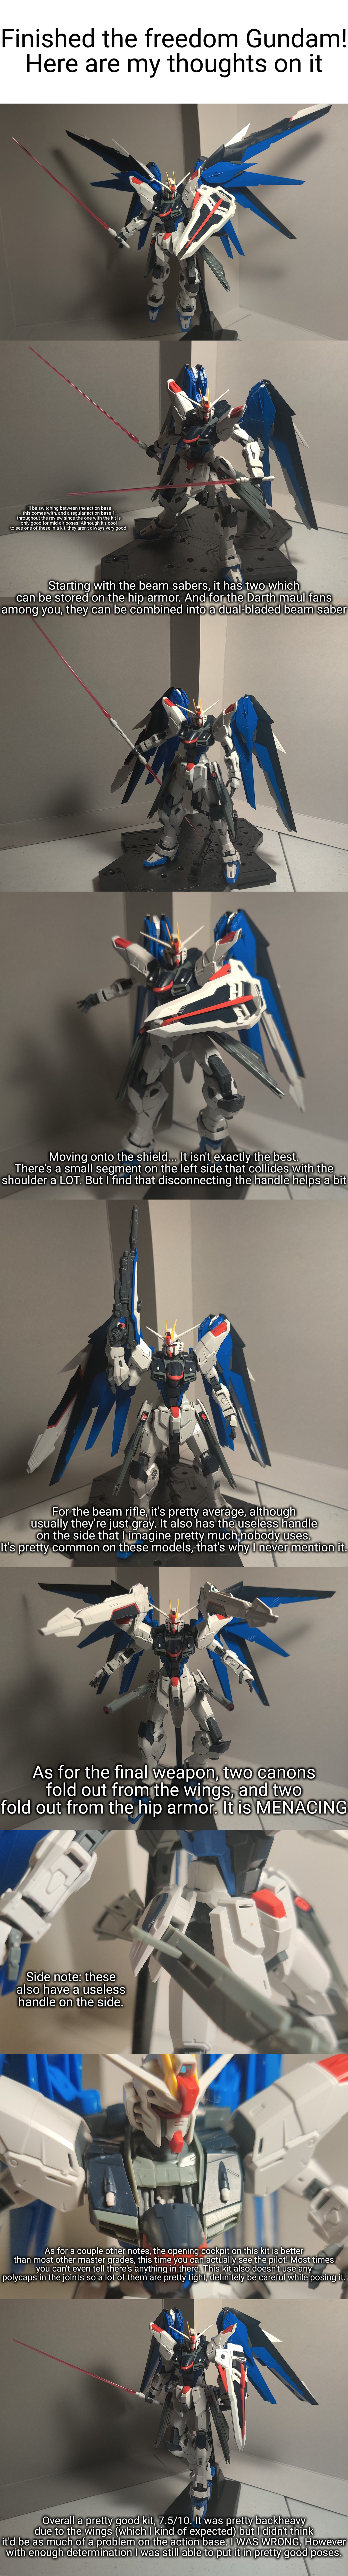 I forgot to mention articulation, but although it's pretty tight it has a nice range of motion | Finished the freedom Gundam!
Here are my thoughts on it; I'll be switching between the action base this comes with, and a regular action base 1 throughout the review since the one with the kit is only good for mid-air poses. Although it's cool to see one of these in a kit, they aren't always very good. Starting with the beam sabers, it has two which can be stored on the hip armor. And for the Darth maul fans among you, they can be combined into a dual-bladed beam saber; Moving onto the shield... It isn't exactly the best. There's a small segment on the left side that collides with the shoulder a LOT. But I find that disconnecting the handle helps a bit; For the beam rifle, it's pretty average, although usually they're just gray. It also has the useless handle on the side that I imagine pretty much nobody uses. It's pretty common on these models, that's why I never mention it. As for the final weapon, two canons fold out from the wings, and two fold out from the hip armor. It is MENACING; Side note: these also have a useless handle on the side. As for a couple other notes, the opening cockpit on this kit is better than most other master grades, this time you can actually see the pilot! Most times you can't even tell there's anything in there. This kit also doesn't use any polycaps in the joints so a lot of them are pretty tight, definitely be careful while posing it. Overall a pretty good kit, 7.5/10. It was pretty backheavy due to the wings (which I kind of expected) but I didn't think it'd be as much of a problem on the action base. I WAS WRONG. However with enough determination I was still able to put it in pretty good poses. | image tagged in blank white template | made w/ Imgflip meme maker